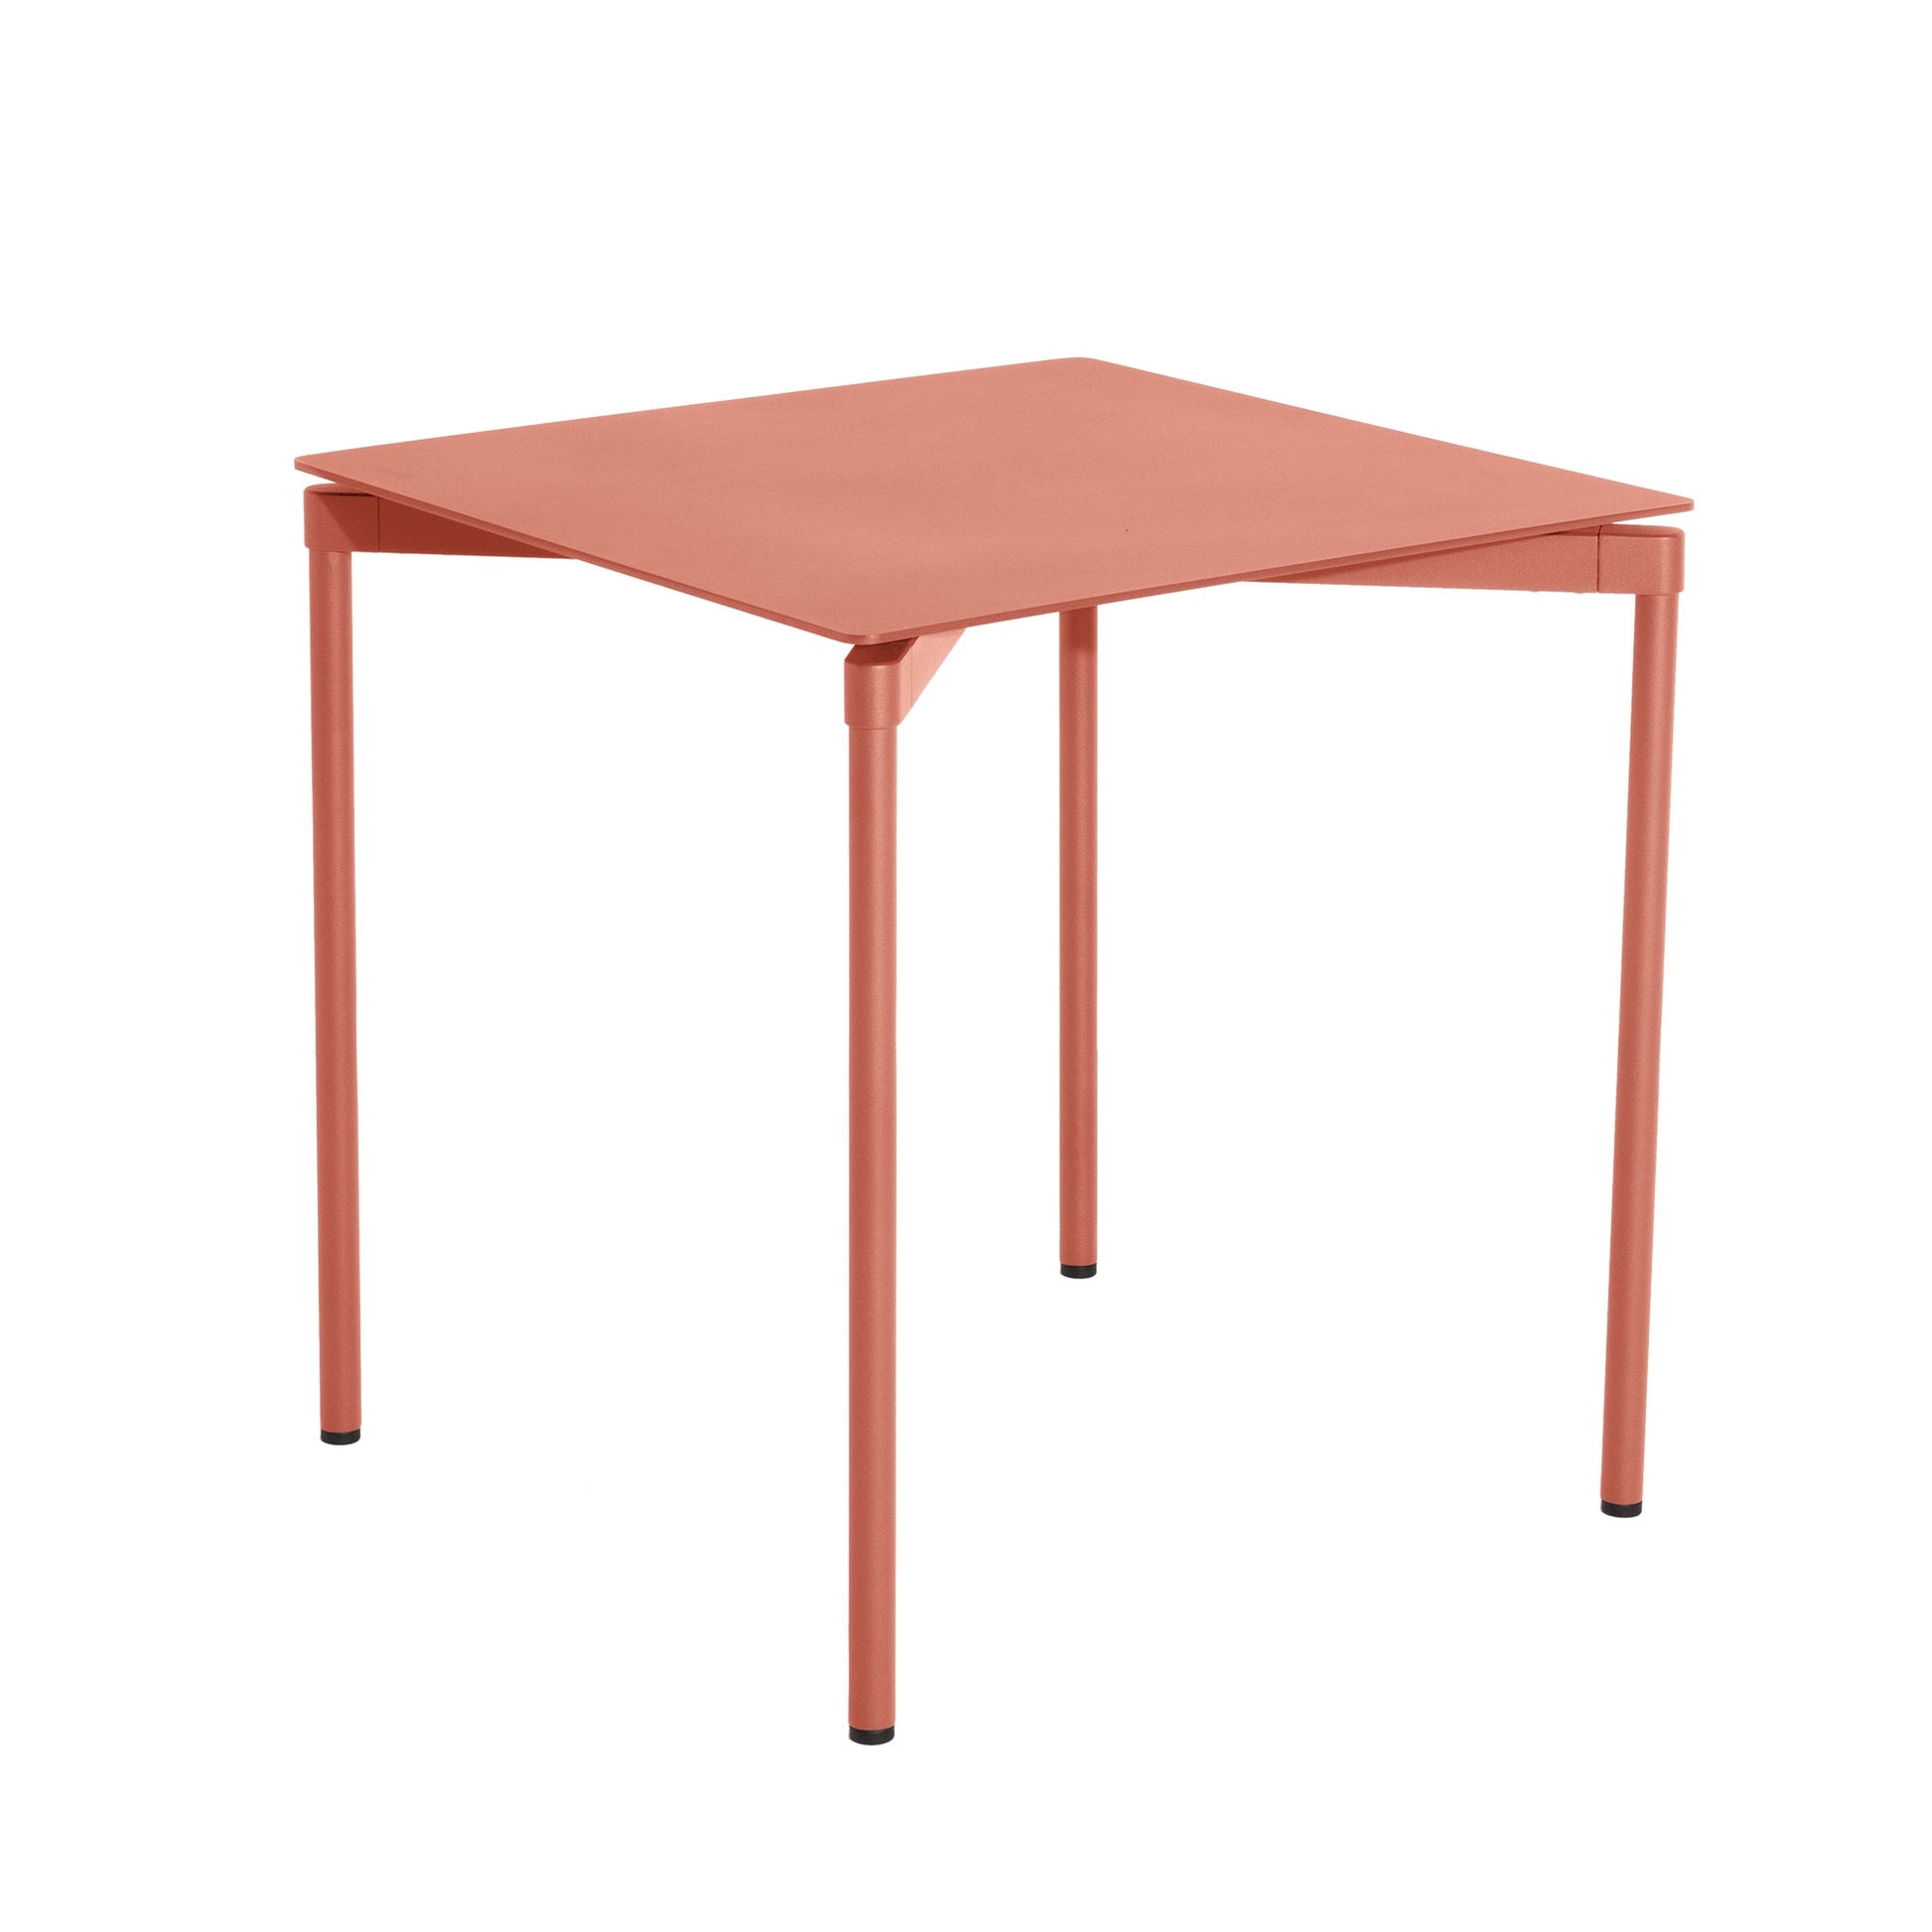 FROMME Table by Petite Friture #Coral